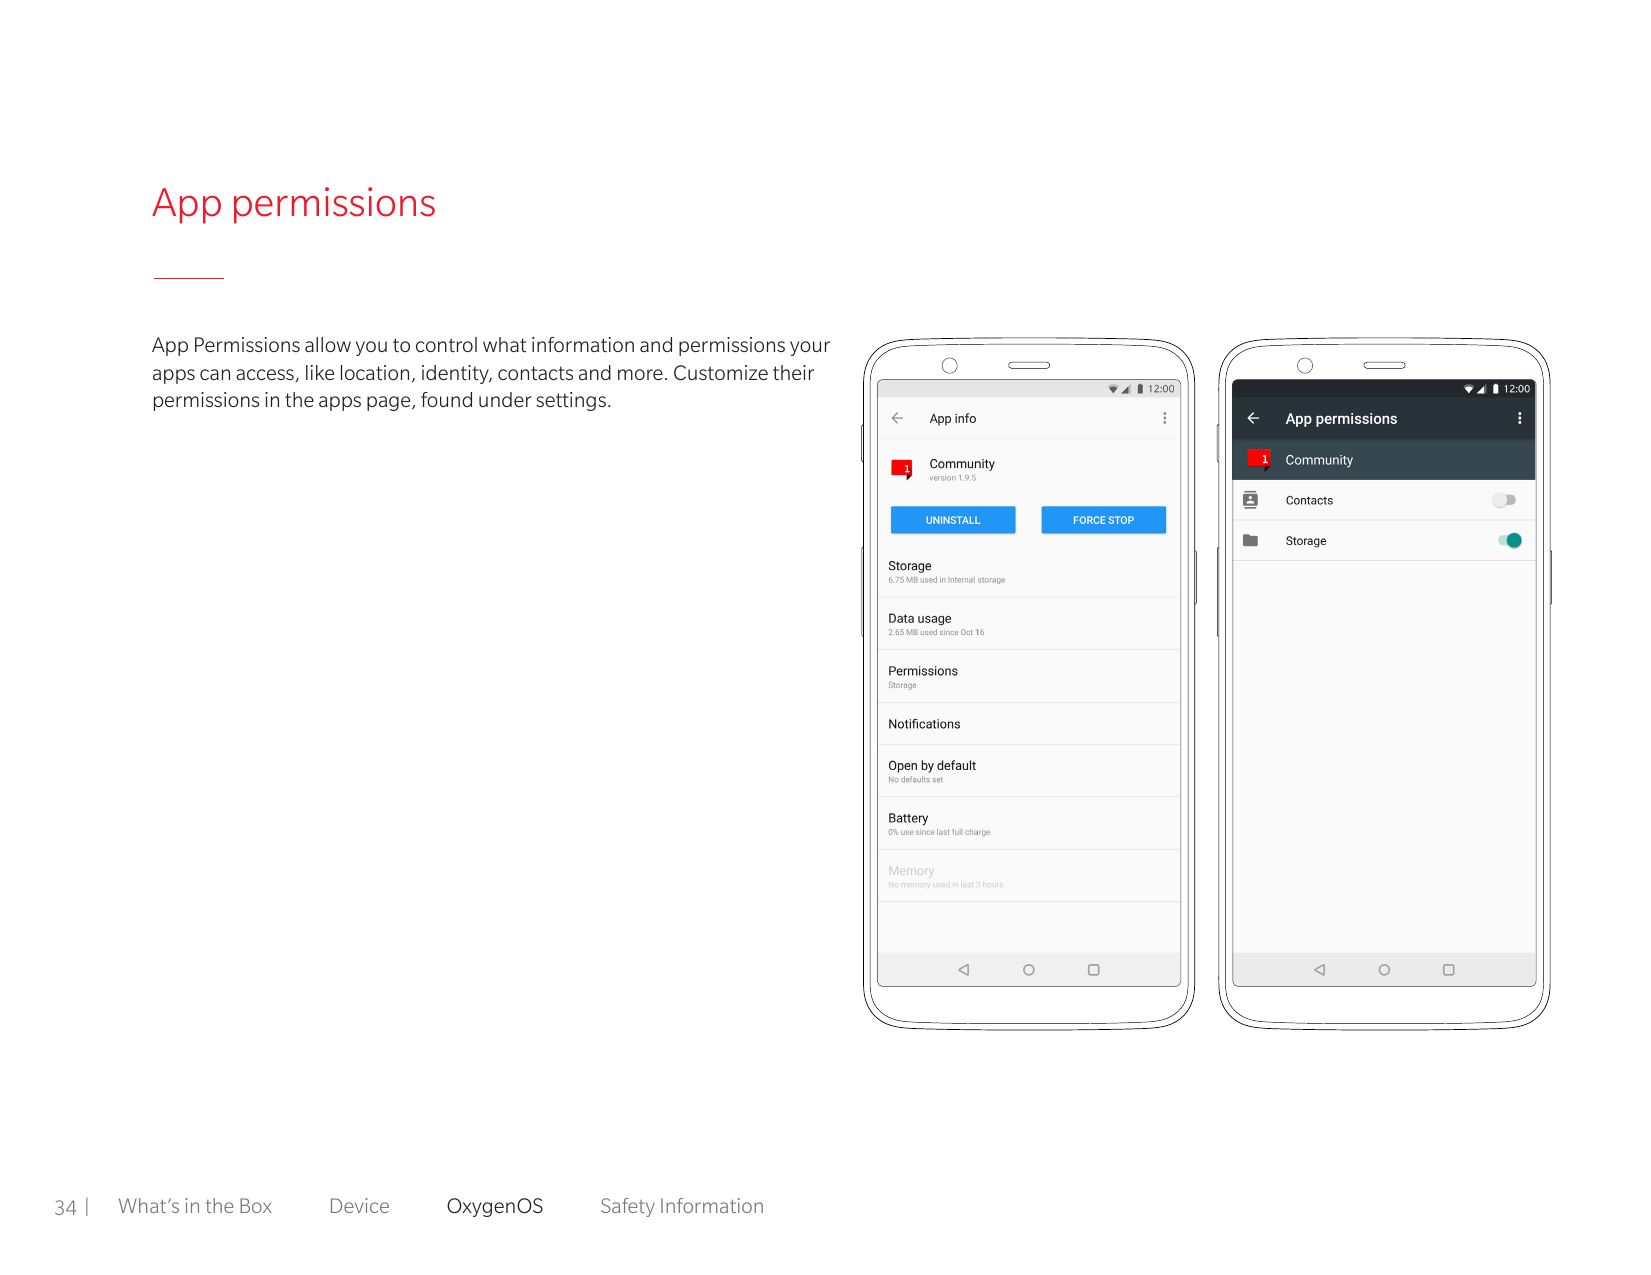 App permissionsApp Permissions allow you to control what information and permissions yourapps can access, like location, identit